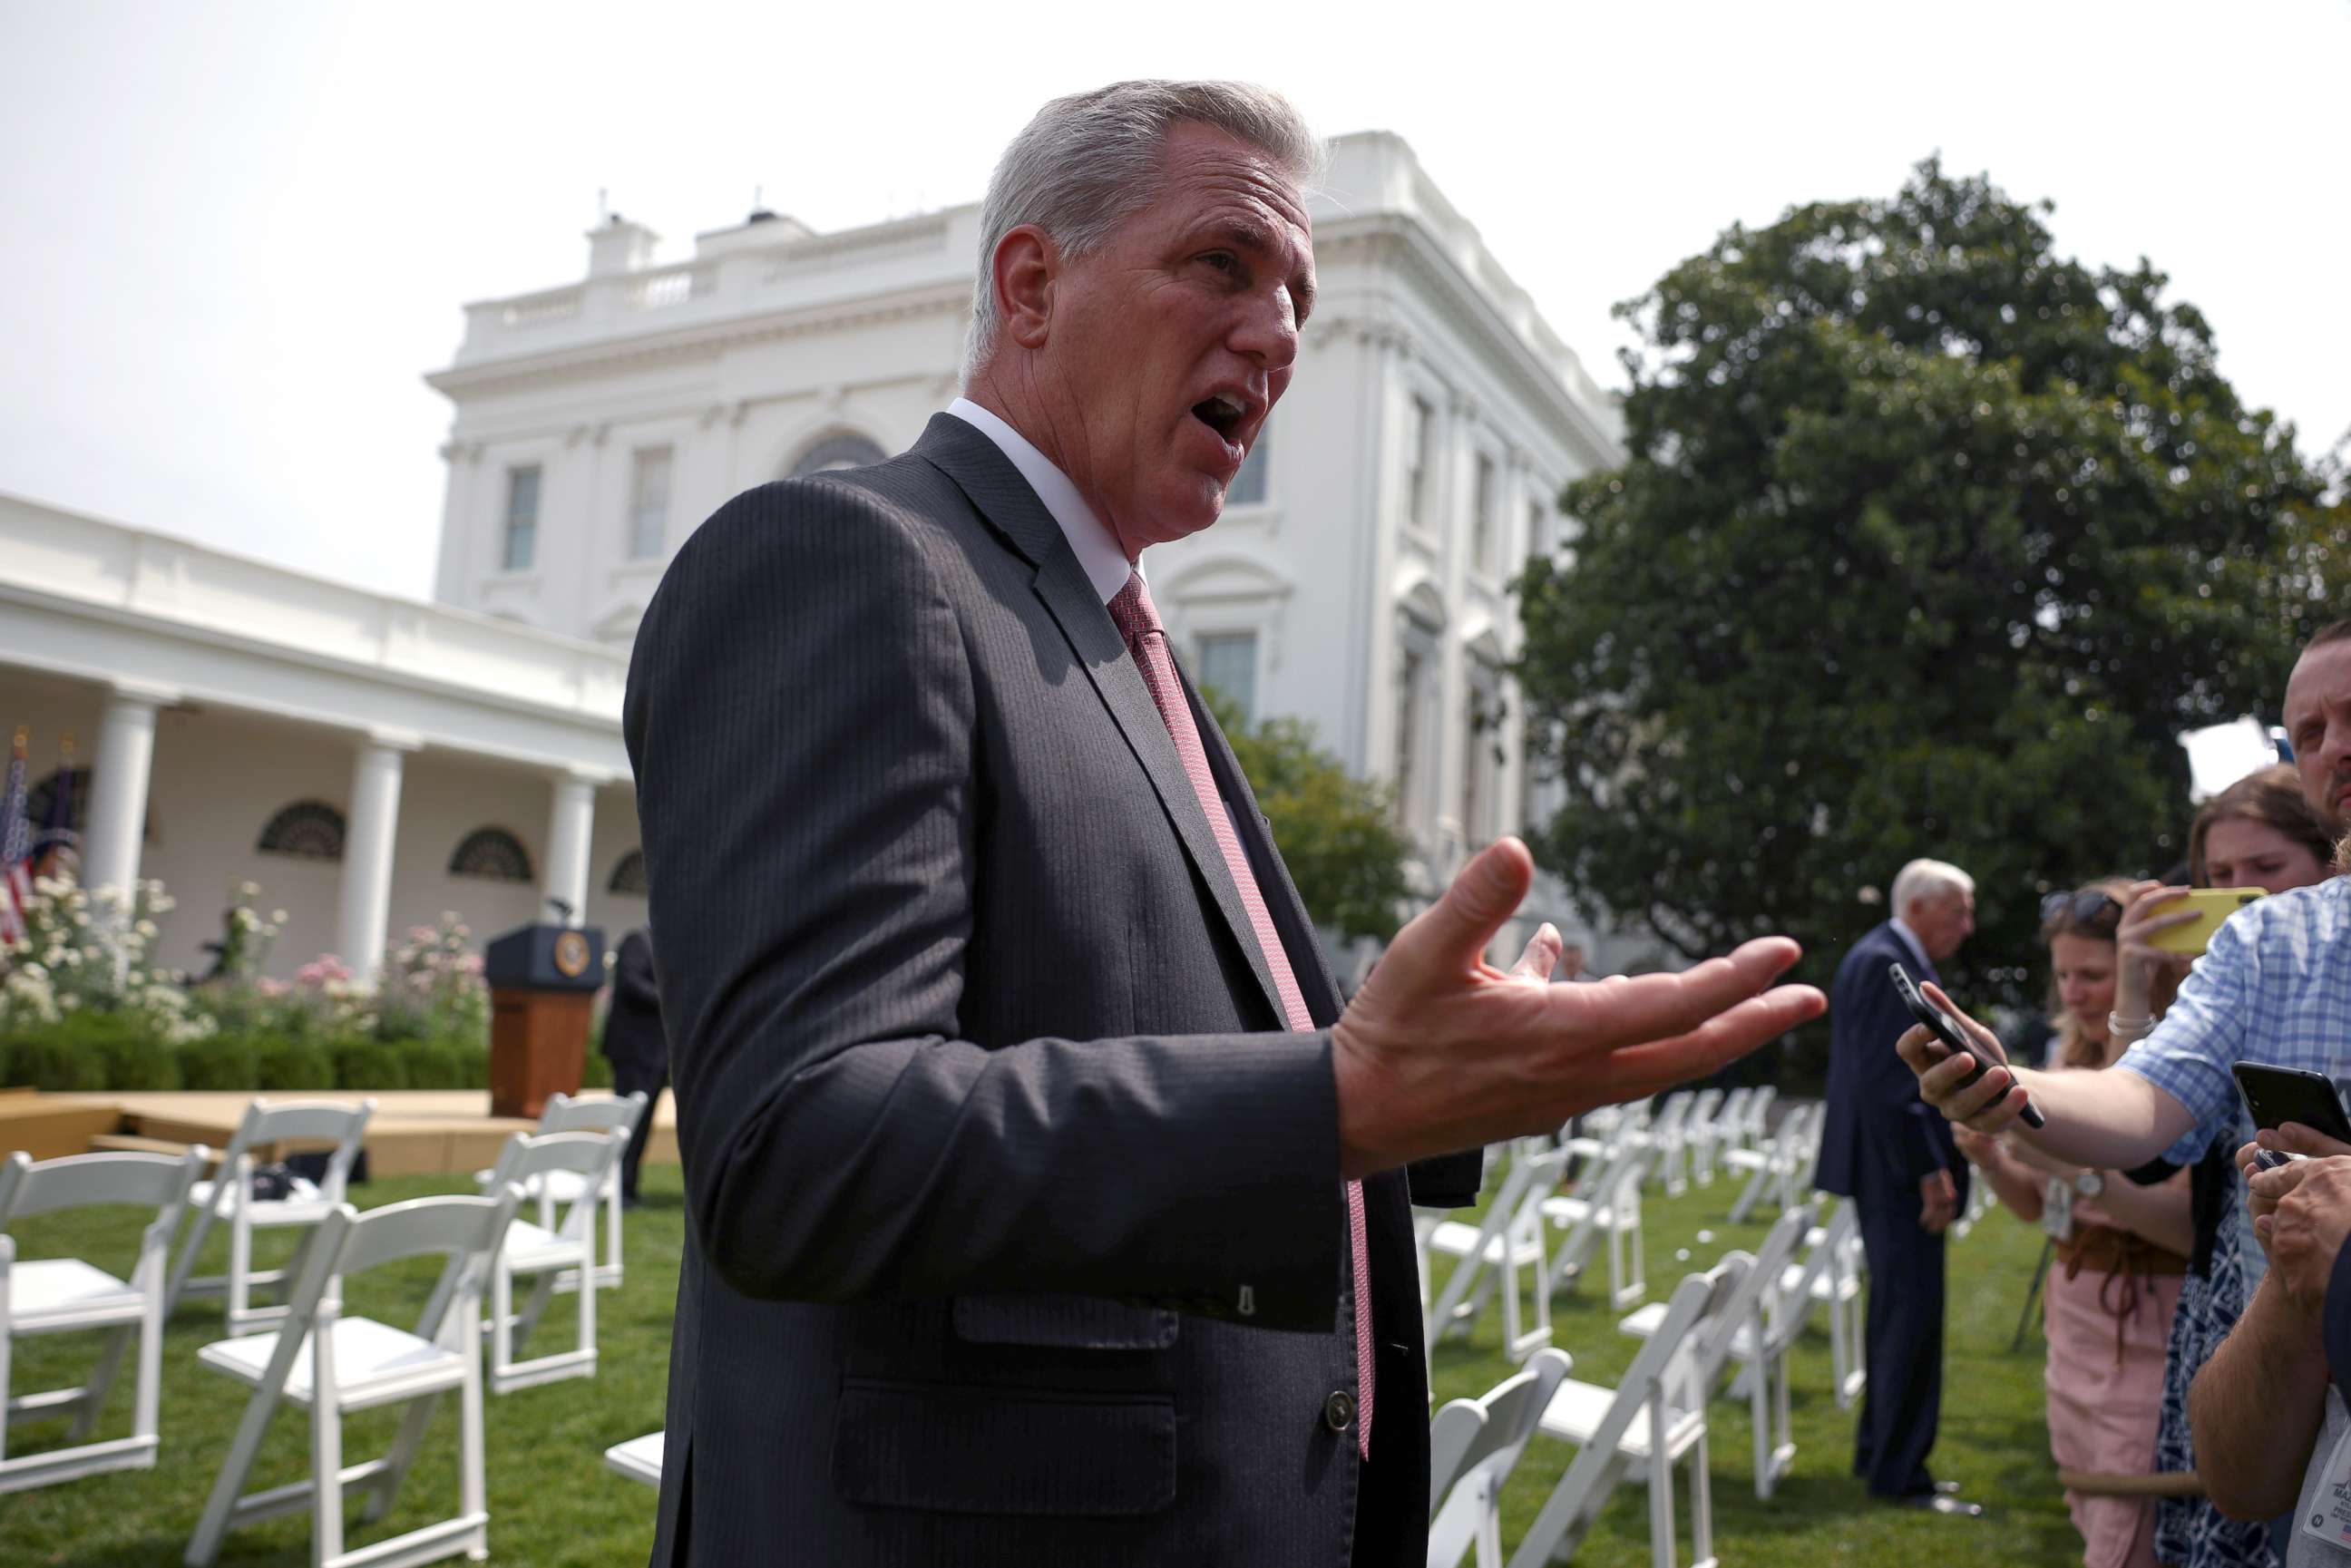 PHOTO: House Minority Leader Kevin McCarthy, R-Calif., speaks to reporters before a ceremony to mark the 31st anniversary of the Americans with Disabilities Act (ADA) in the Rose Garden of the White House on July 26, 2021 in Washington.